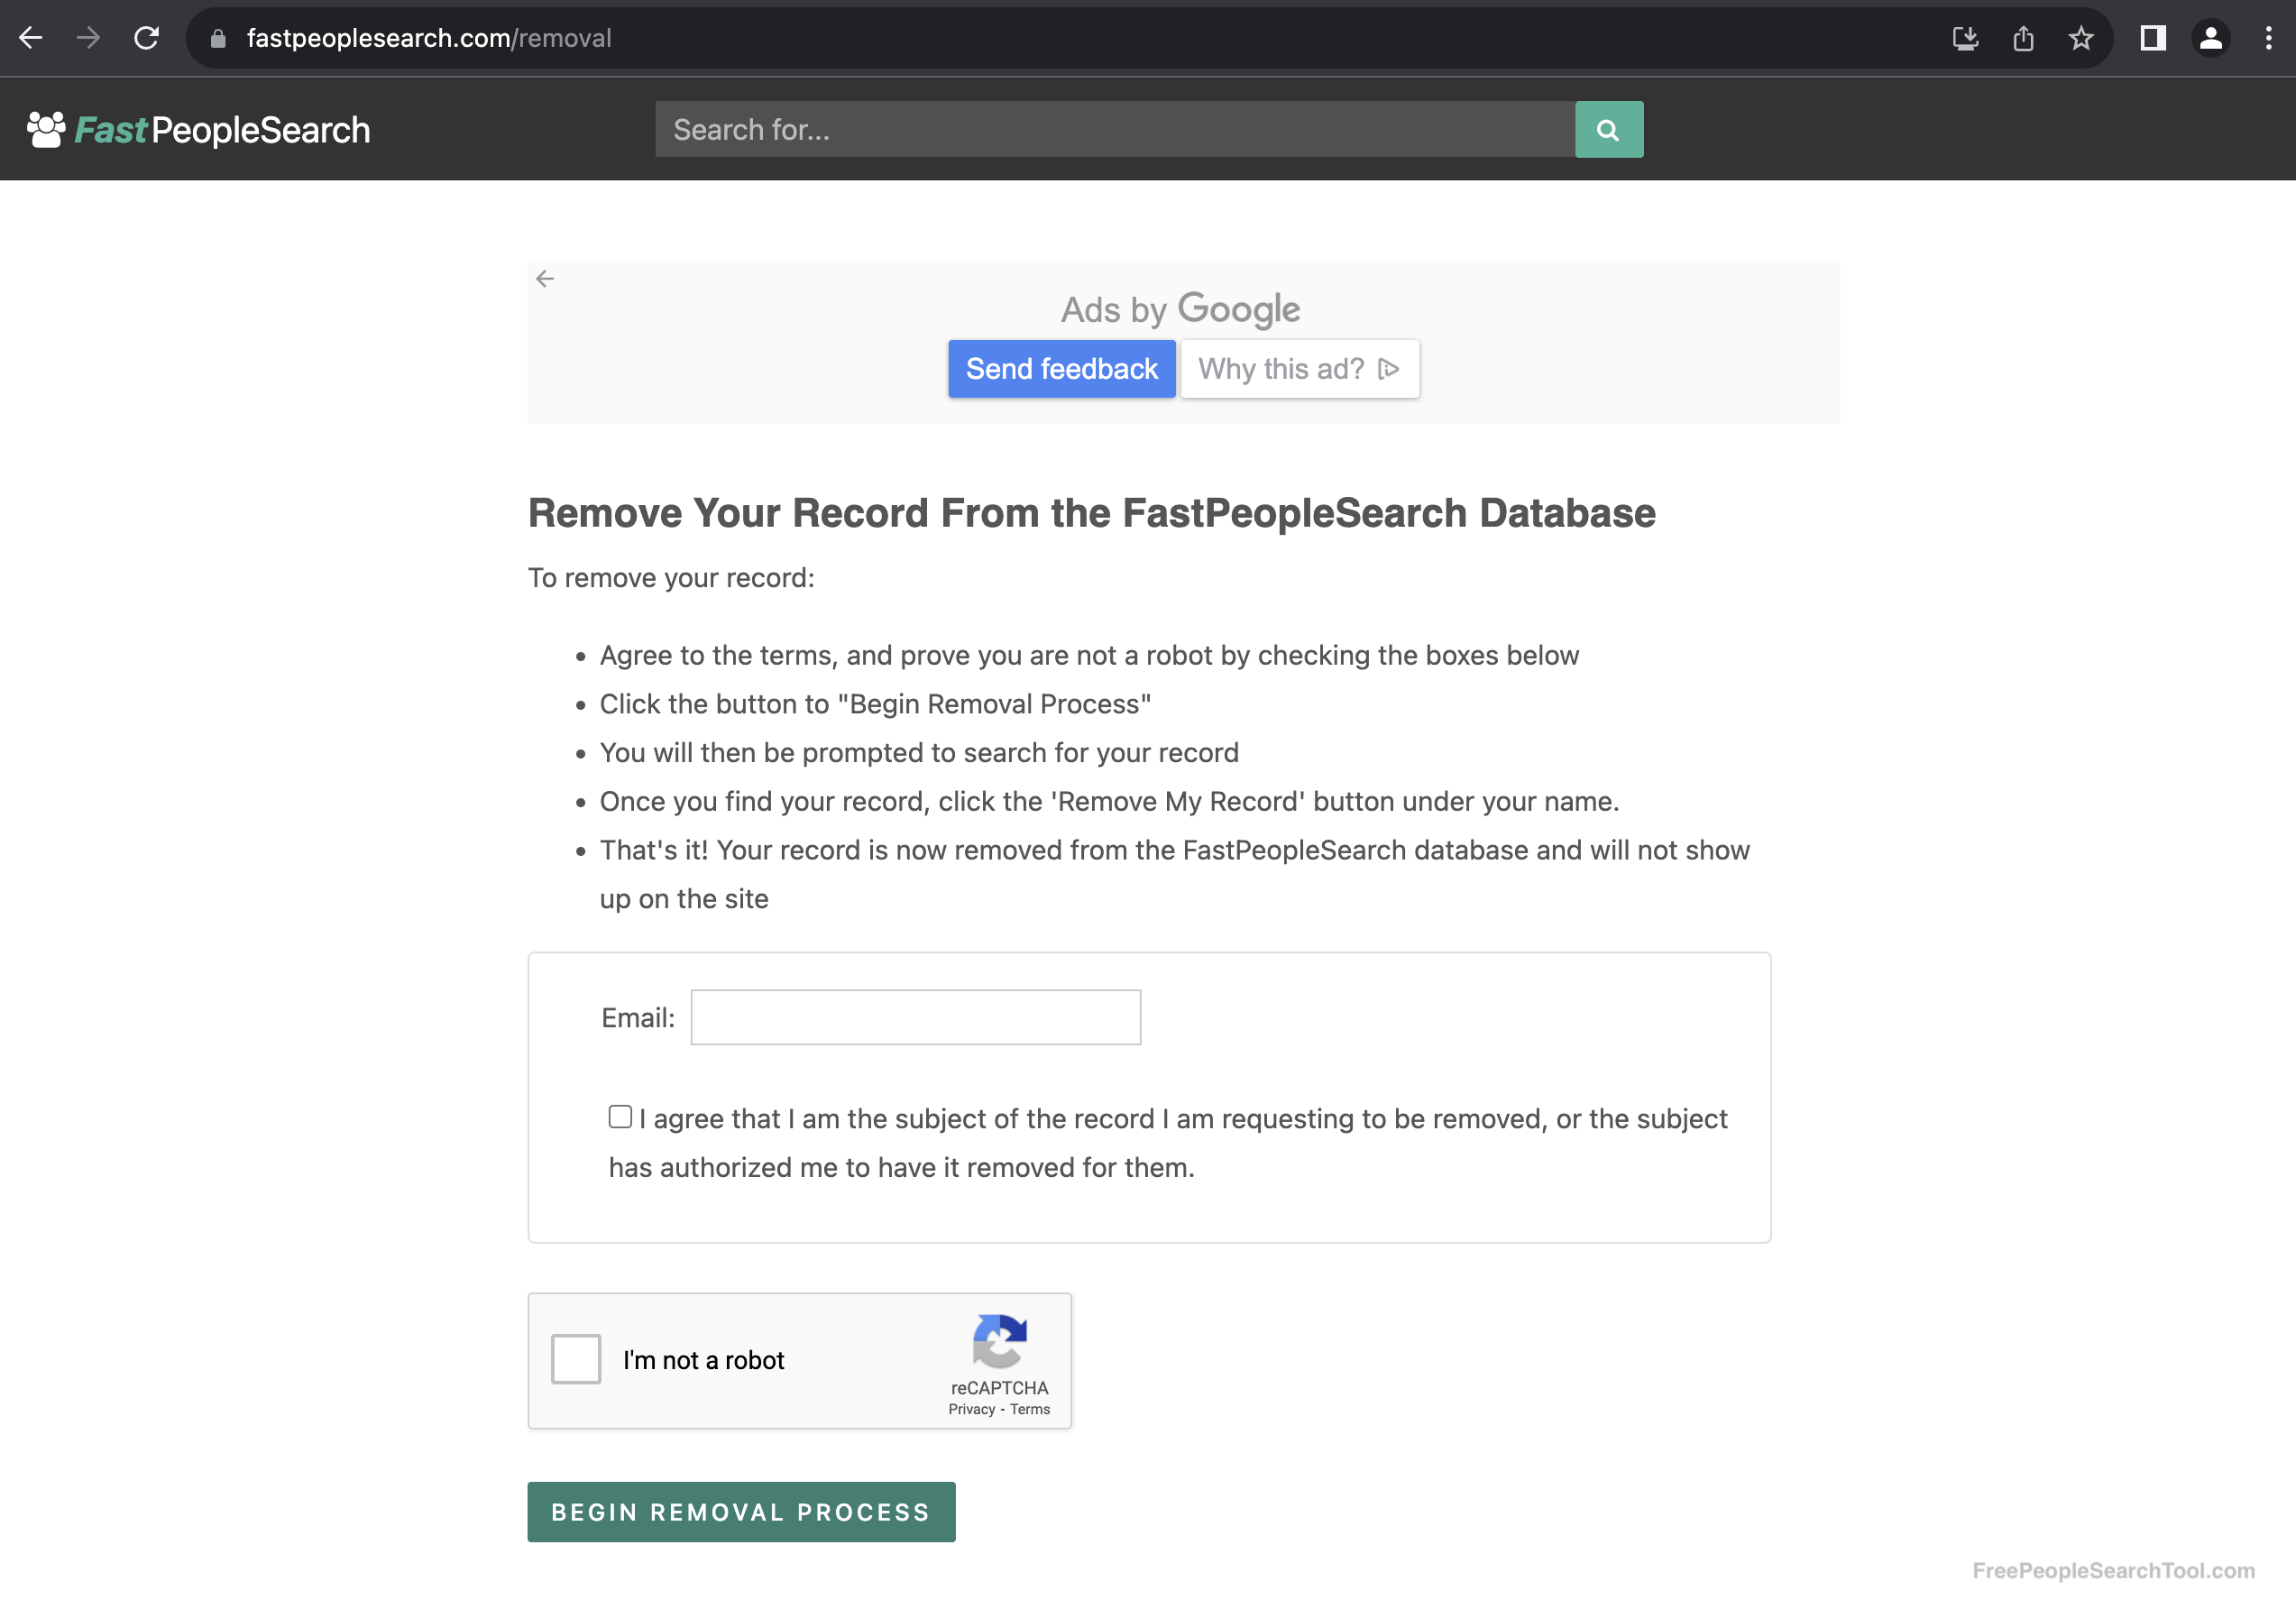 fastpeoplesearch opt out page blank